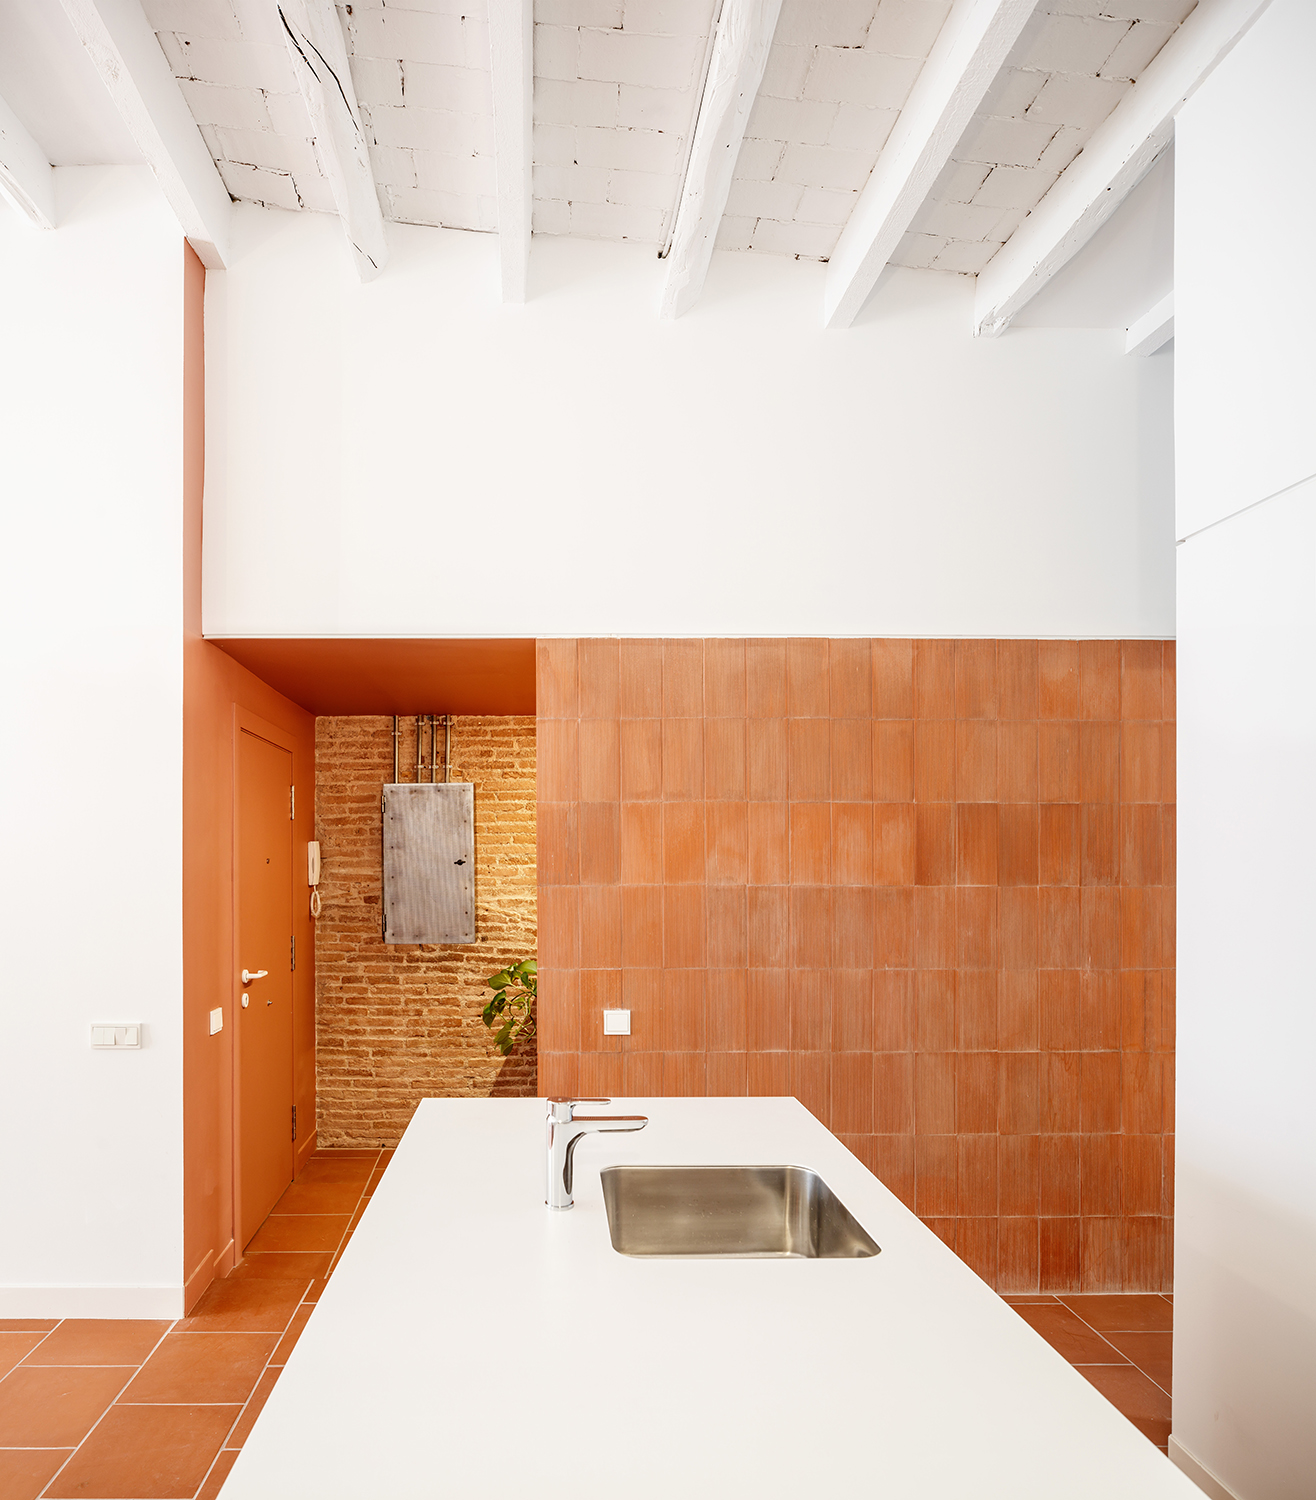 CRU innovative flat renovation project in Barcelona. La Odette, an old apartment converted into a modern and spacious piece.